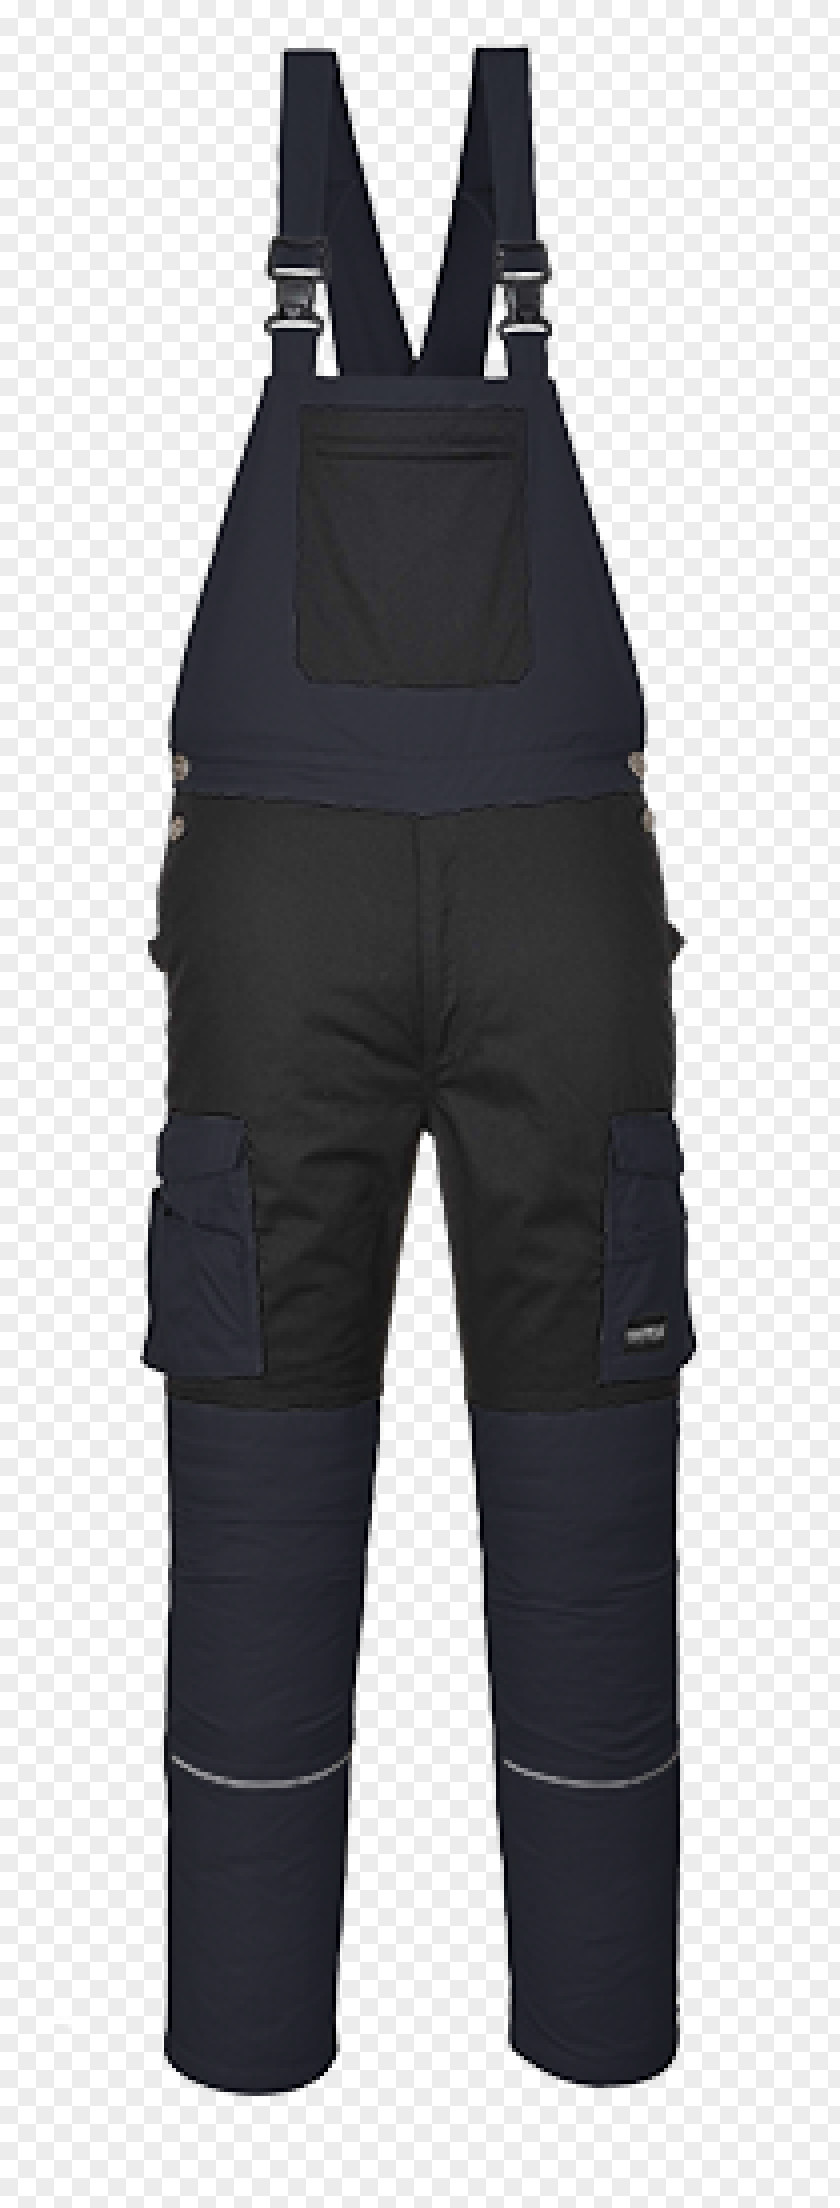 Best Bib And Tucker Overall Hockey Protective Pants & Ski Shorts Portwest Braces PNG